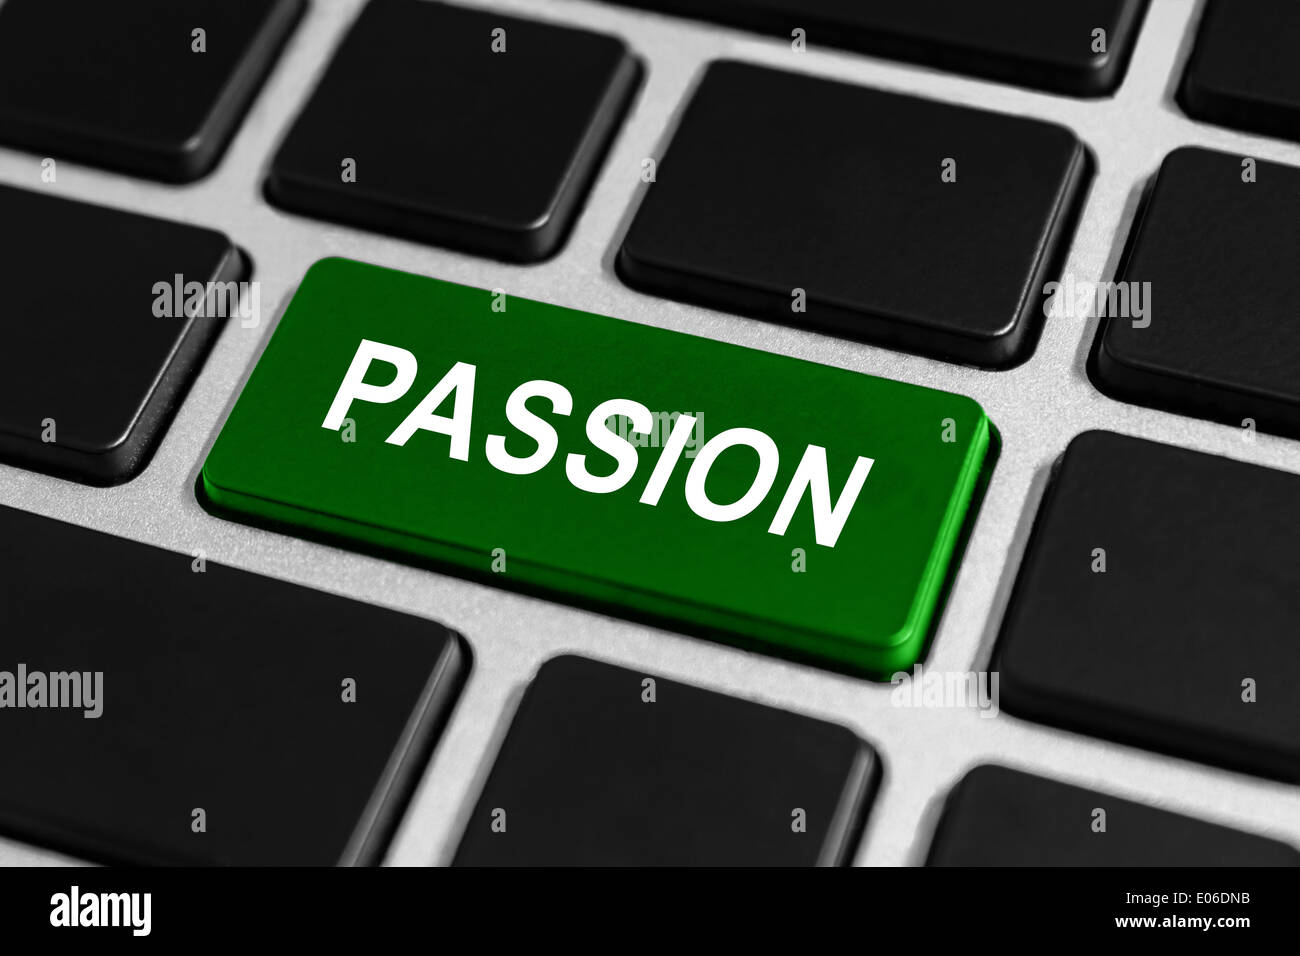 passion green button on keyboard, business concept Stock Photo